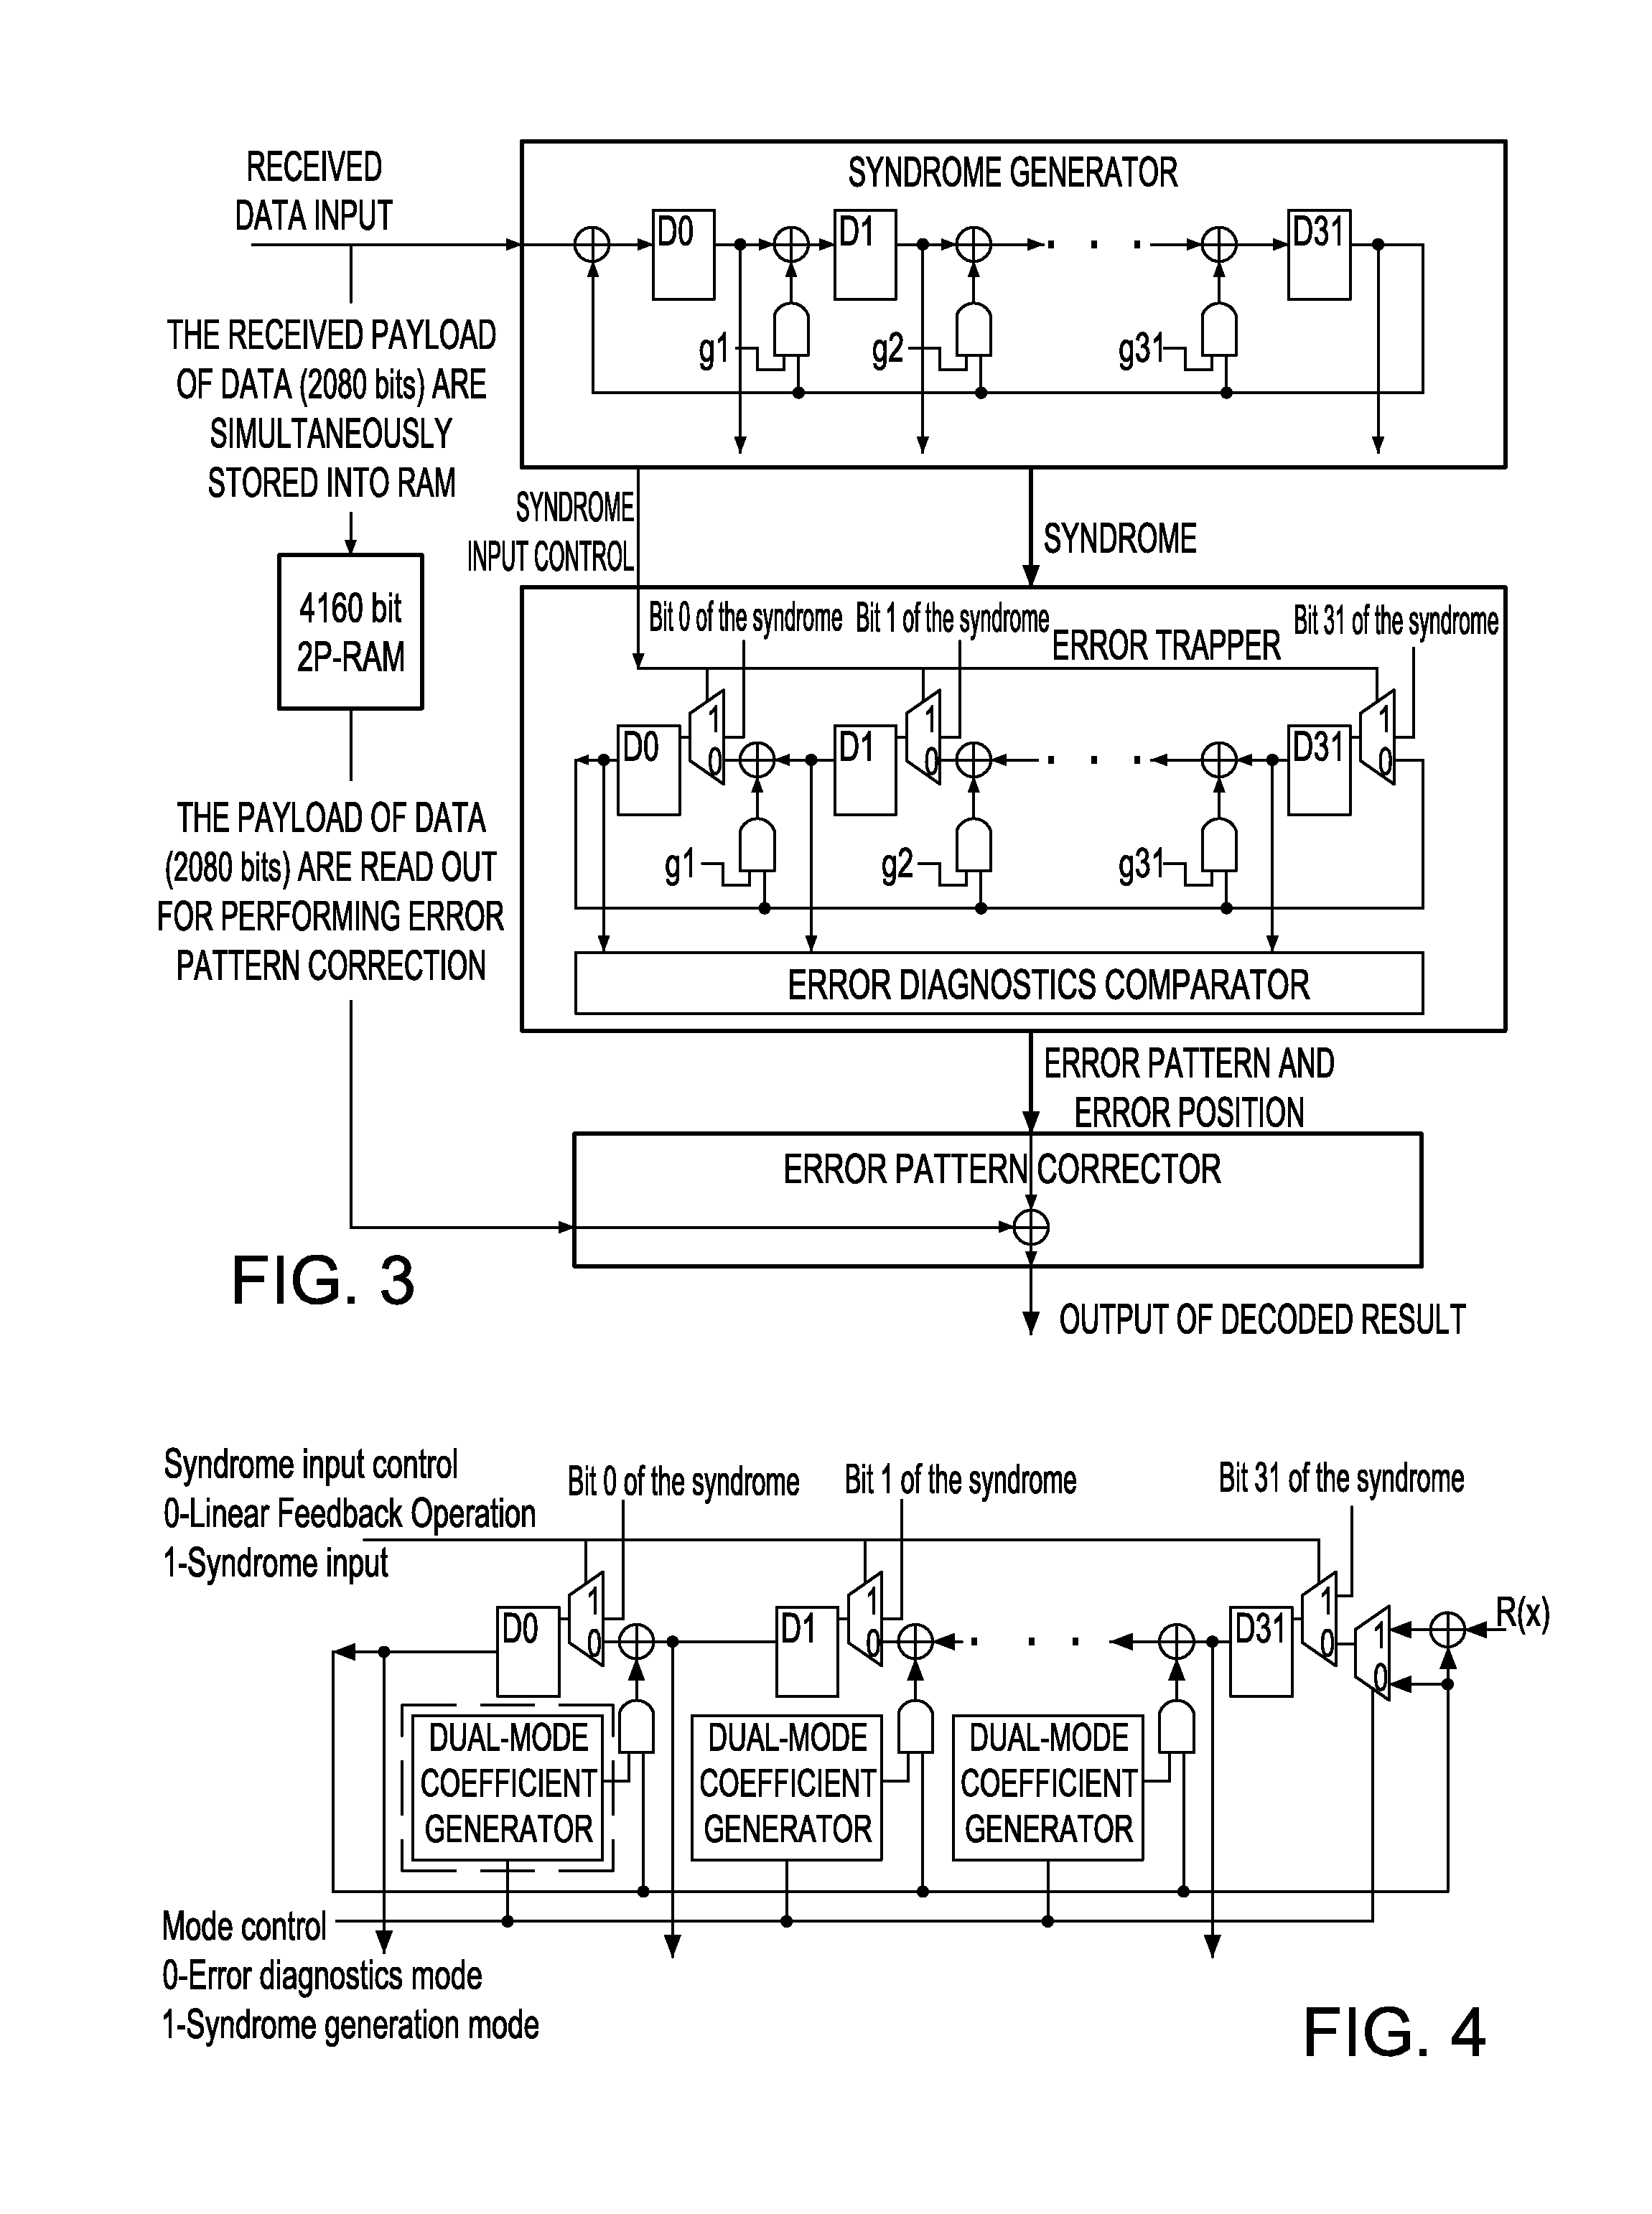 Frame Boundary Detection and Synchronization System for Data Stream Received by Ethernet Forward Error Correction Layer